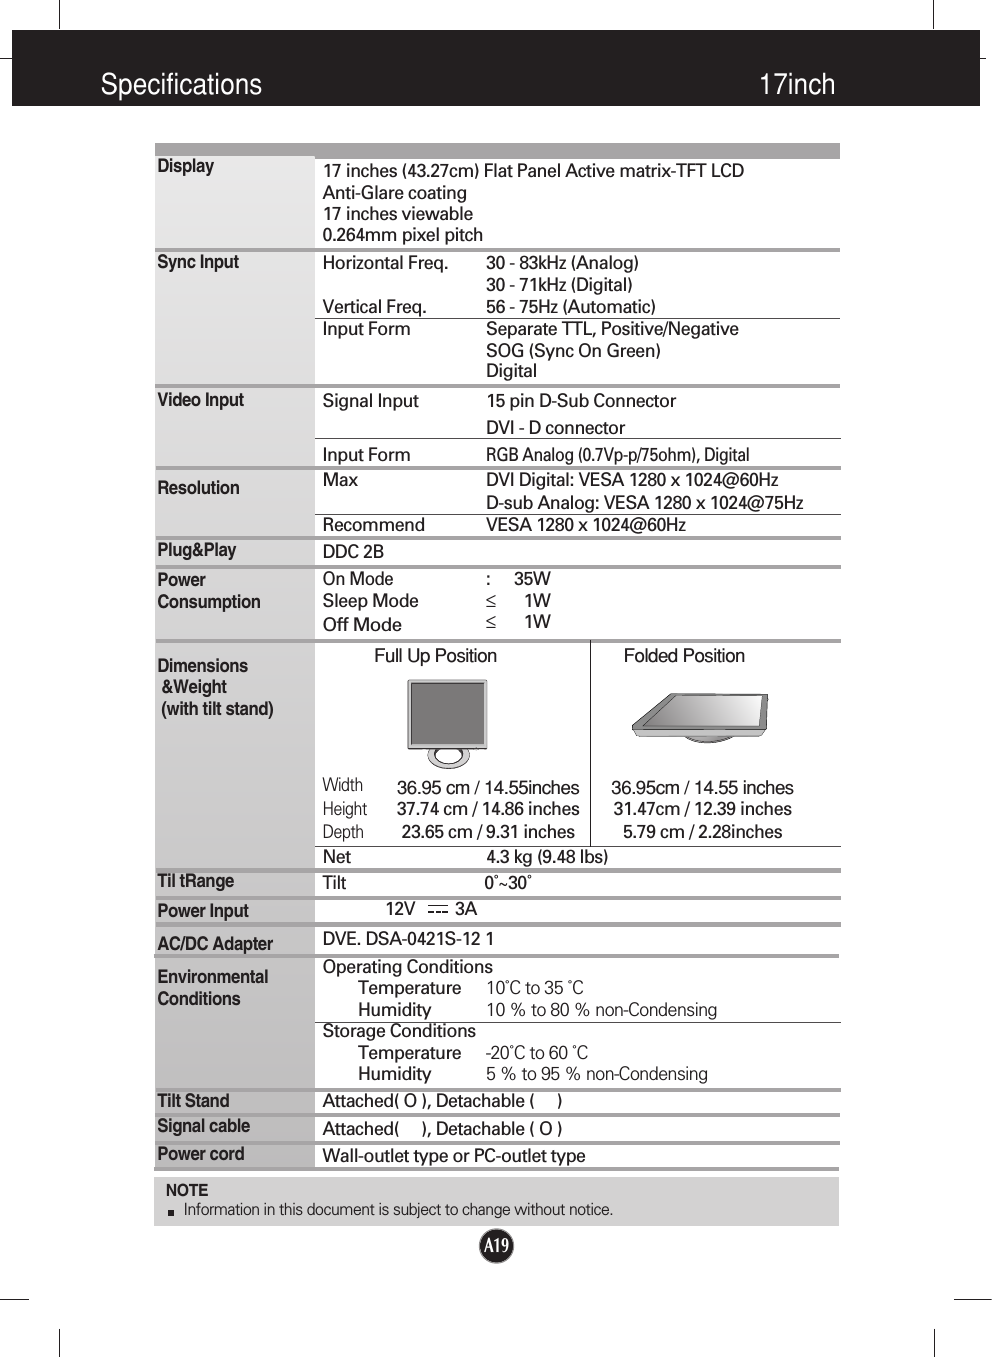 A19Specifications                                                                    17inchNOTEInformation in this document is subject to change without notice.17 inches (43.27cm) Flat Panel Active matrix-TFT LCD Anti-Glare coating17 inches viewable0.264mm pixel pitchHorizontal Freq. 30 - 83kHz (Analog)30 - 71kHz (Digital)Vertical Freq. 56 - 75Hz (Automatic)Input Form Separate TTL, Positive/NegativeSOG (Sync On Green) DigitalSignal Input 15 pin D-Sub ConnectorDVI - D connectorInput FormRGB Analog (0.7Vp-p/75ohm), DigitalMax DVI Digital: VESA 1280 x 1024@60Hz D-sub Analog: VESA 1280 x 1024@75HzRecommend VESA 1280 x 1024@60HzDDC 2BOn Mode :35WSleep Mode ≤1WOff Mode≤1WFull Up Position Folded PositionWidth36.95 cm / 14.55inches 36.95cm / 14.55 inchesHeight37.74 cm / 14.86 inches 31.47cm / 12.39 inchesDepth23.65 cm / 9.31 inches 5.79 cm / 2.28inchesNet 4.3 kg (9.48 lbs)Tilt0˚~30˚12V         3ADVE. DSA-0421S-12 1Operating ConditionsTemperature 10˚C to 35 ˚CHumidity 10 % to 80 % non-CondensingStorage ConditionsTemperature -20˚C to 60 ˚CHumidity 5 % to 95 % non-CondensingAttached( O ), Detachable (     )Attached(     ), Detachable ( O )Wall-outlet type or PC-outlet typeDisplaySync InputVideo InputResolutionPlug&amp;PlayPowerConsumptionDimensions&amp;Weight(with tilt stand)Til tRangePower InputAC/DC AdapterEnvironmentalConditionsTilt StandSignal cablePower cord